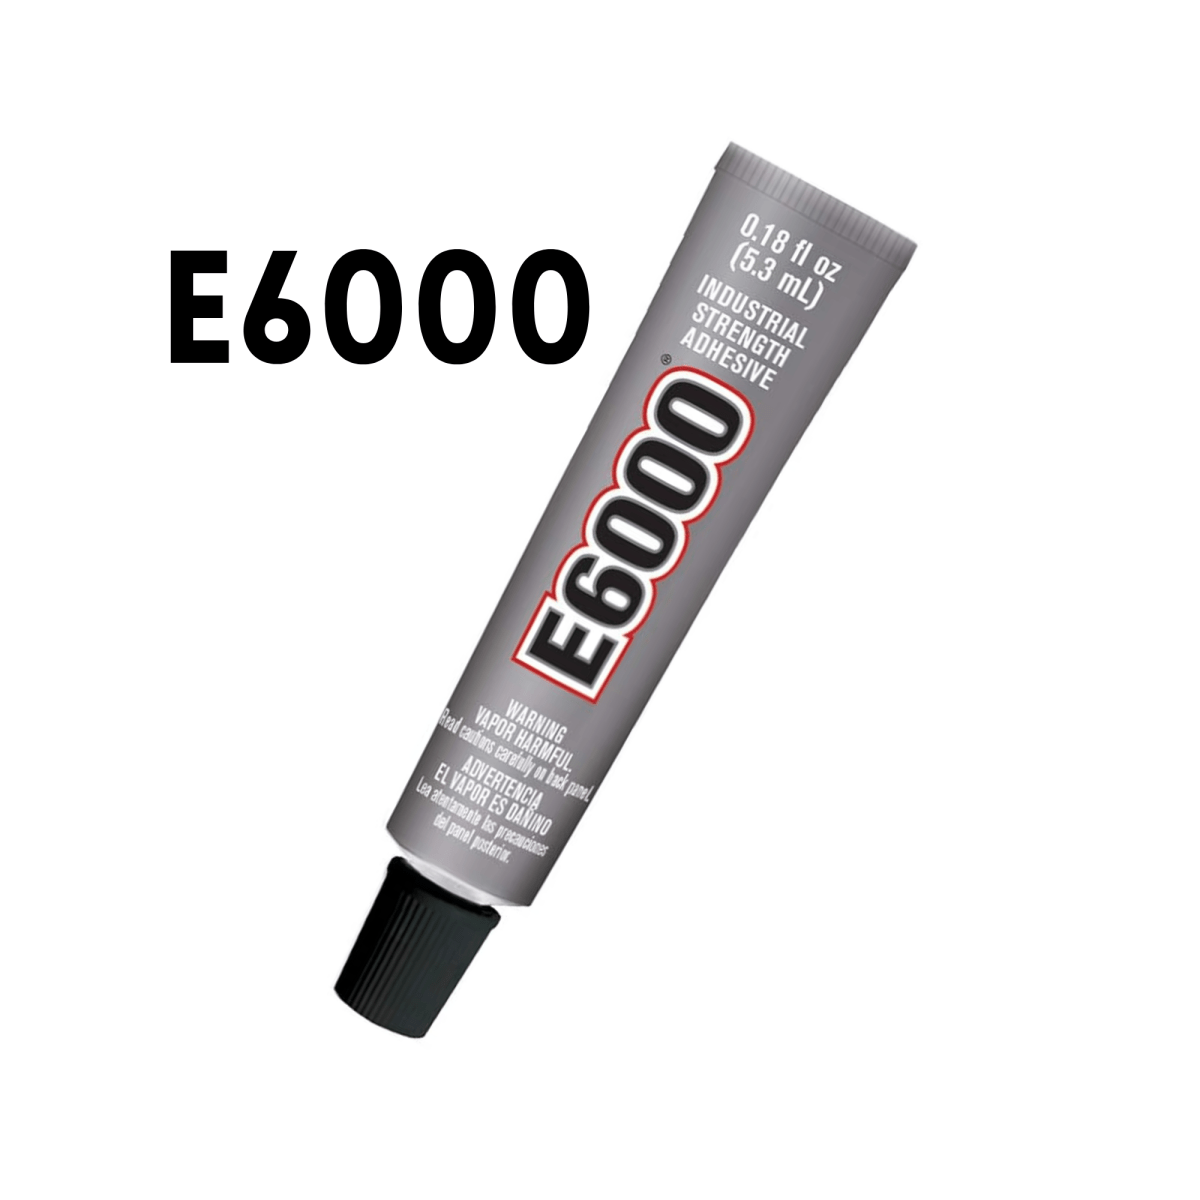 E6000 INDUSTRIAL STRENGTH ADHESIVE - ADHESIVE